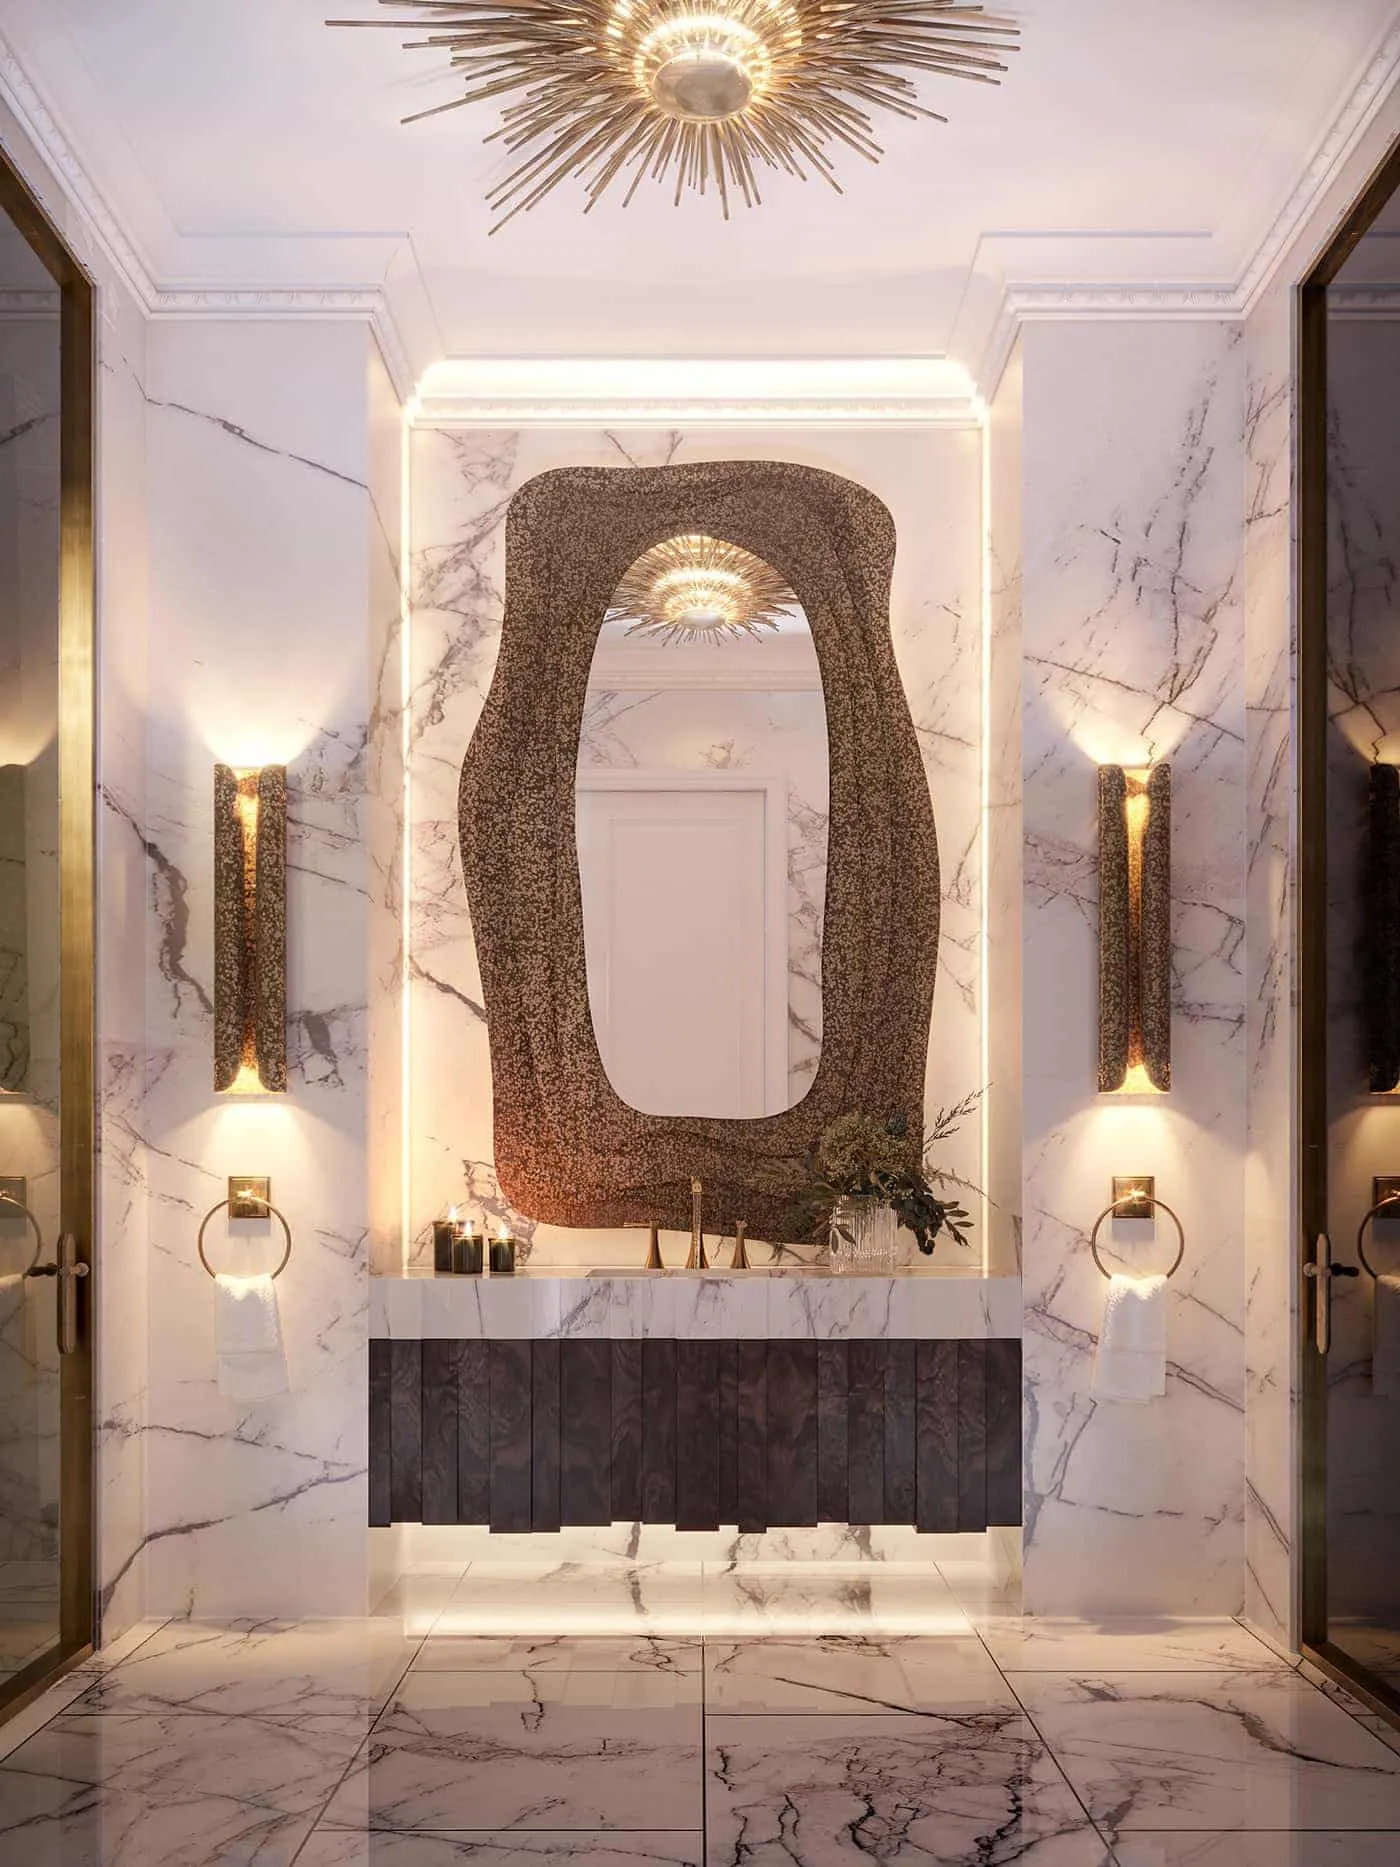 wall sconces & lights installed on the sides of mirror in bathroom, white marble , lavish and beautiful bathroom